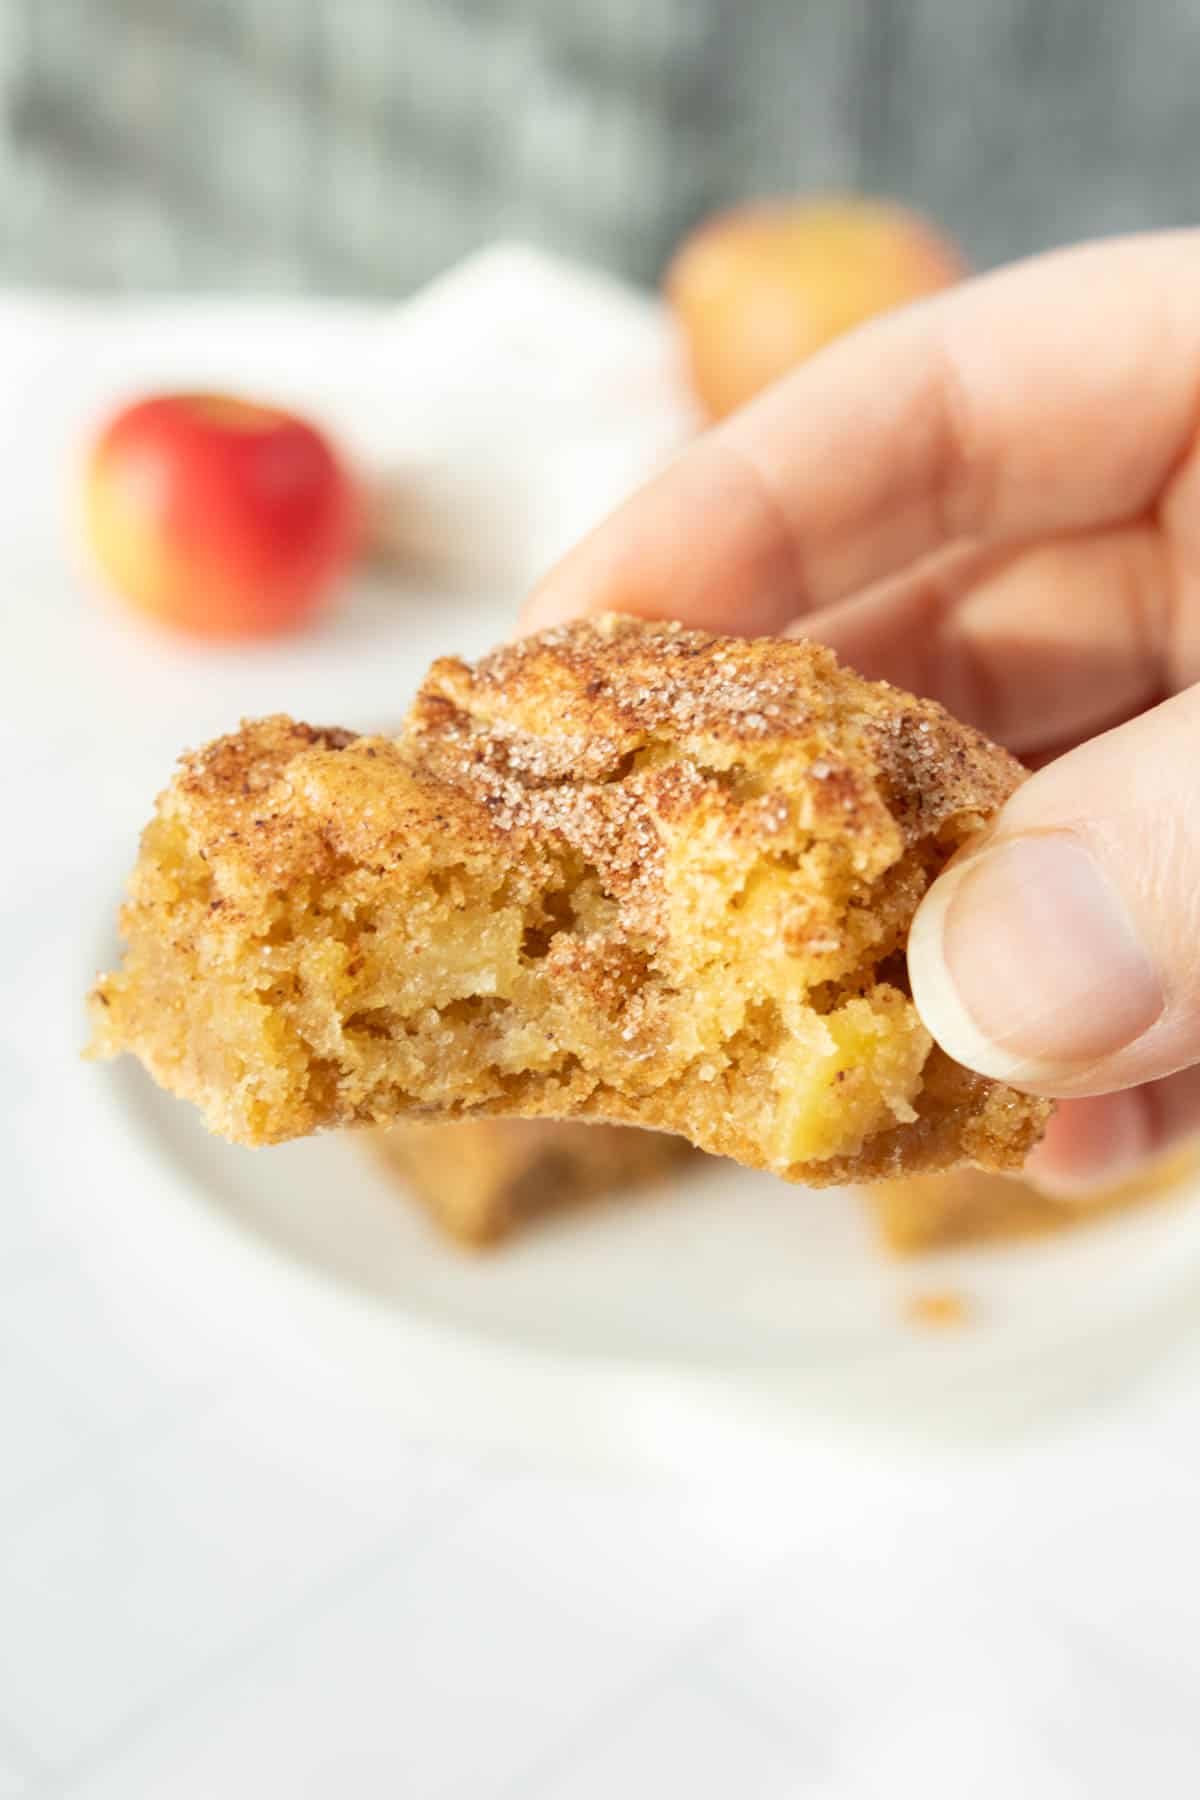 A person holding up a piece of apple cinnamon bars.